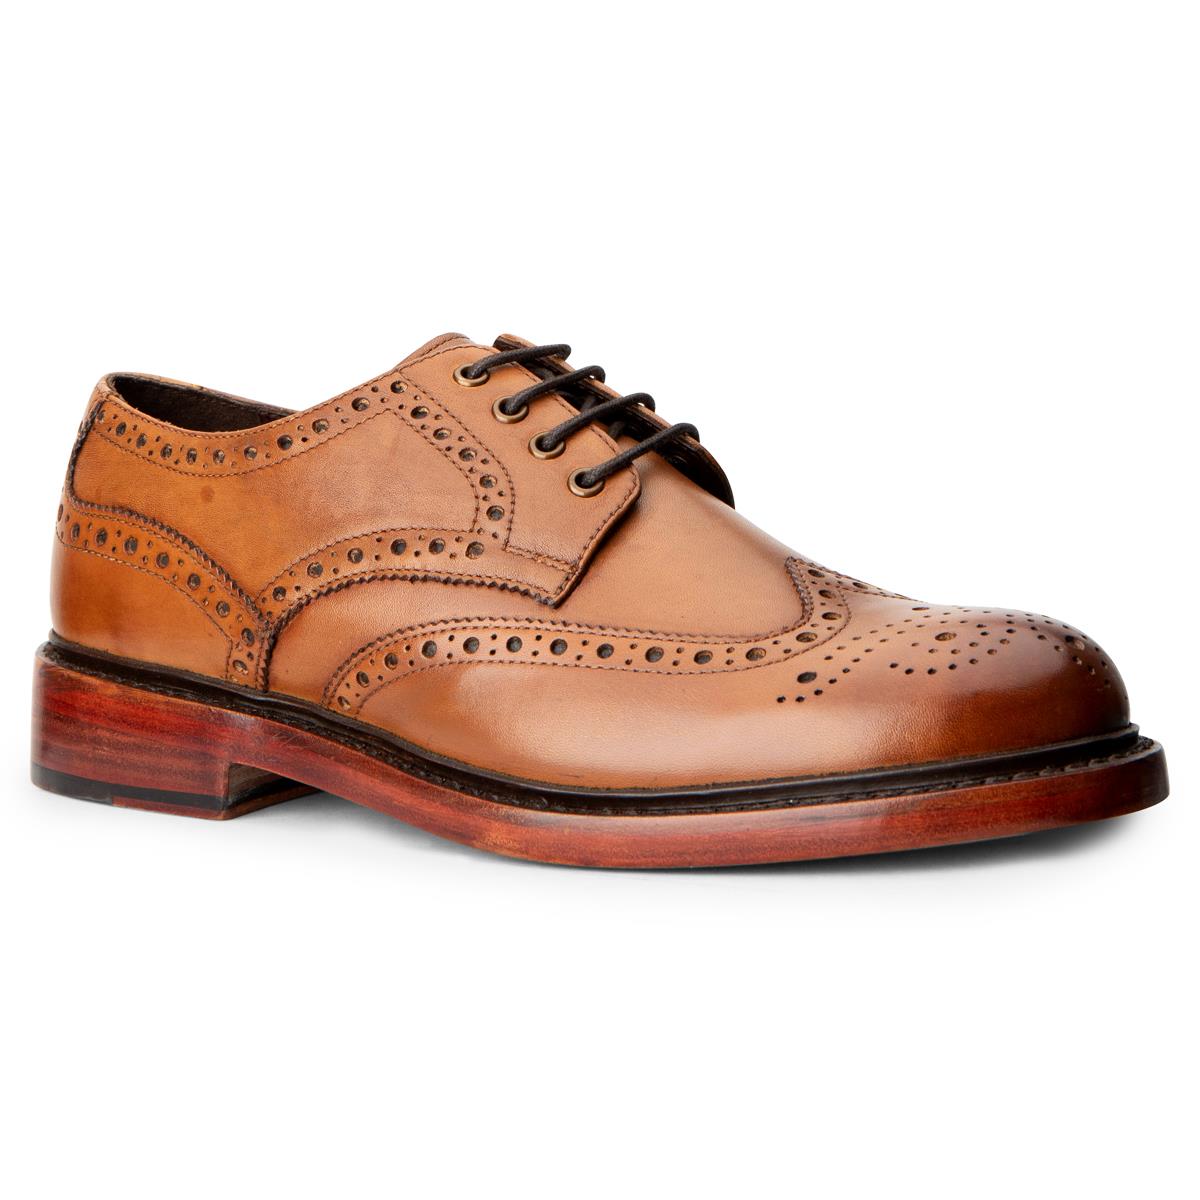 Do the Hoggs Of Fife Mens Muirfield Brogue Shoes come in a wide fitting option?